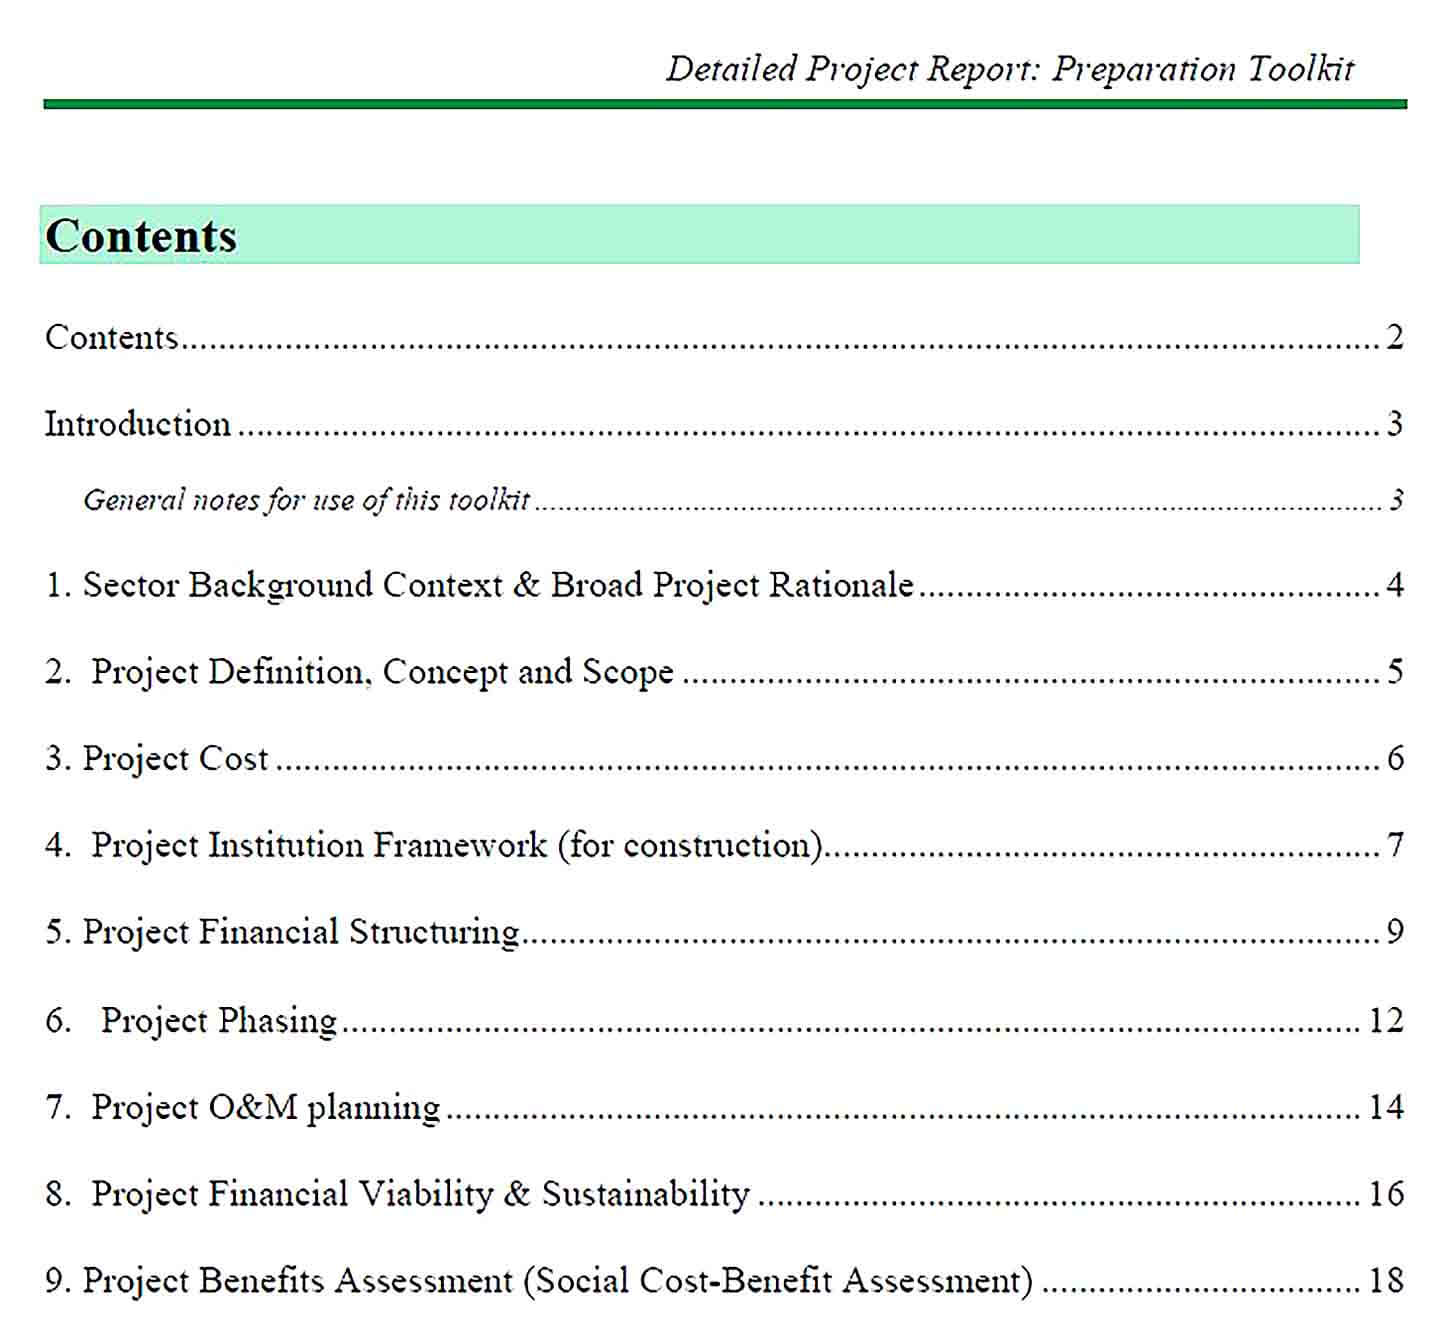 Sample Detailed Project Report Format